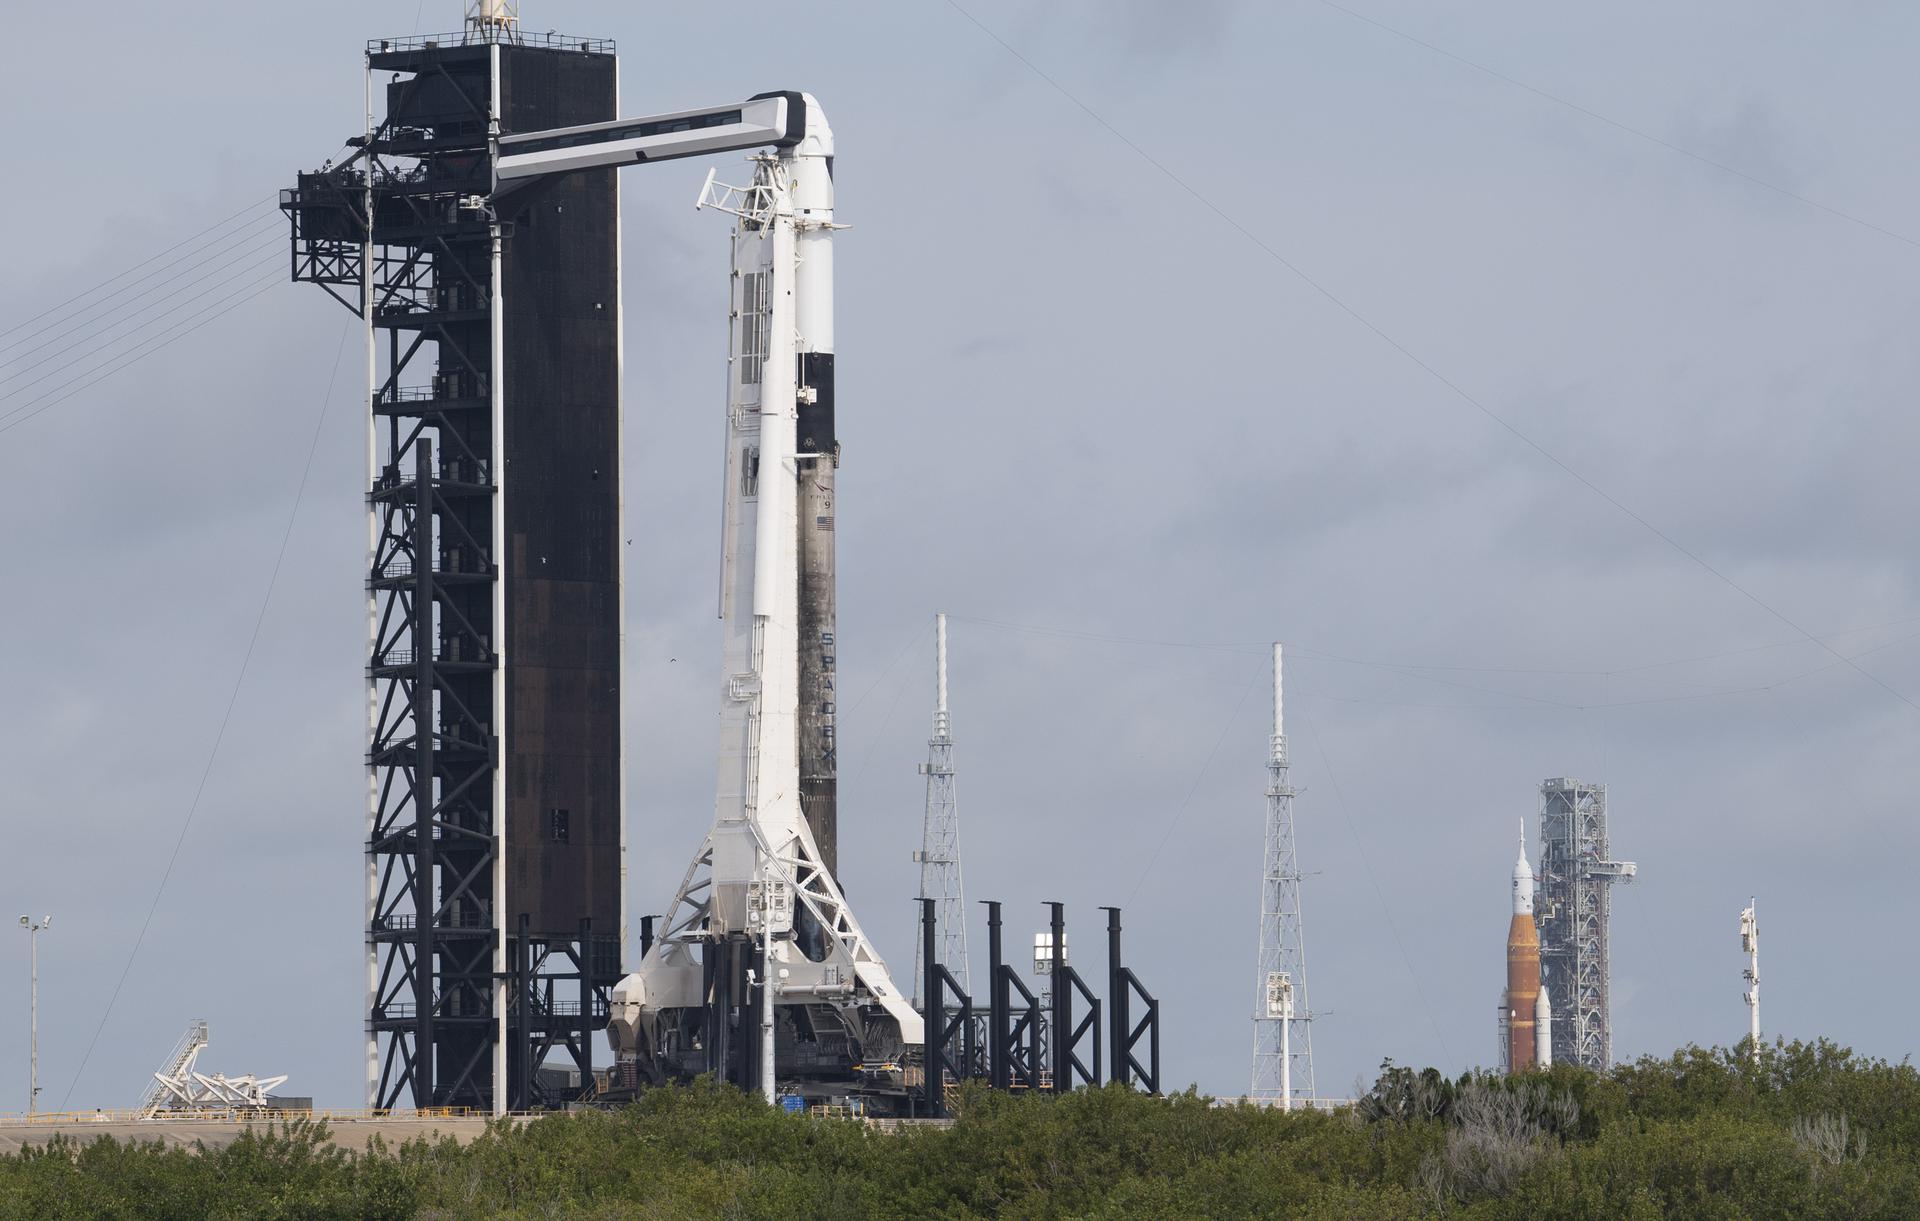 The Axiom-1 mission on the launch pad at Kennedy Space Center in Florida